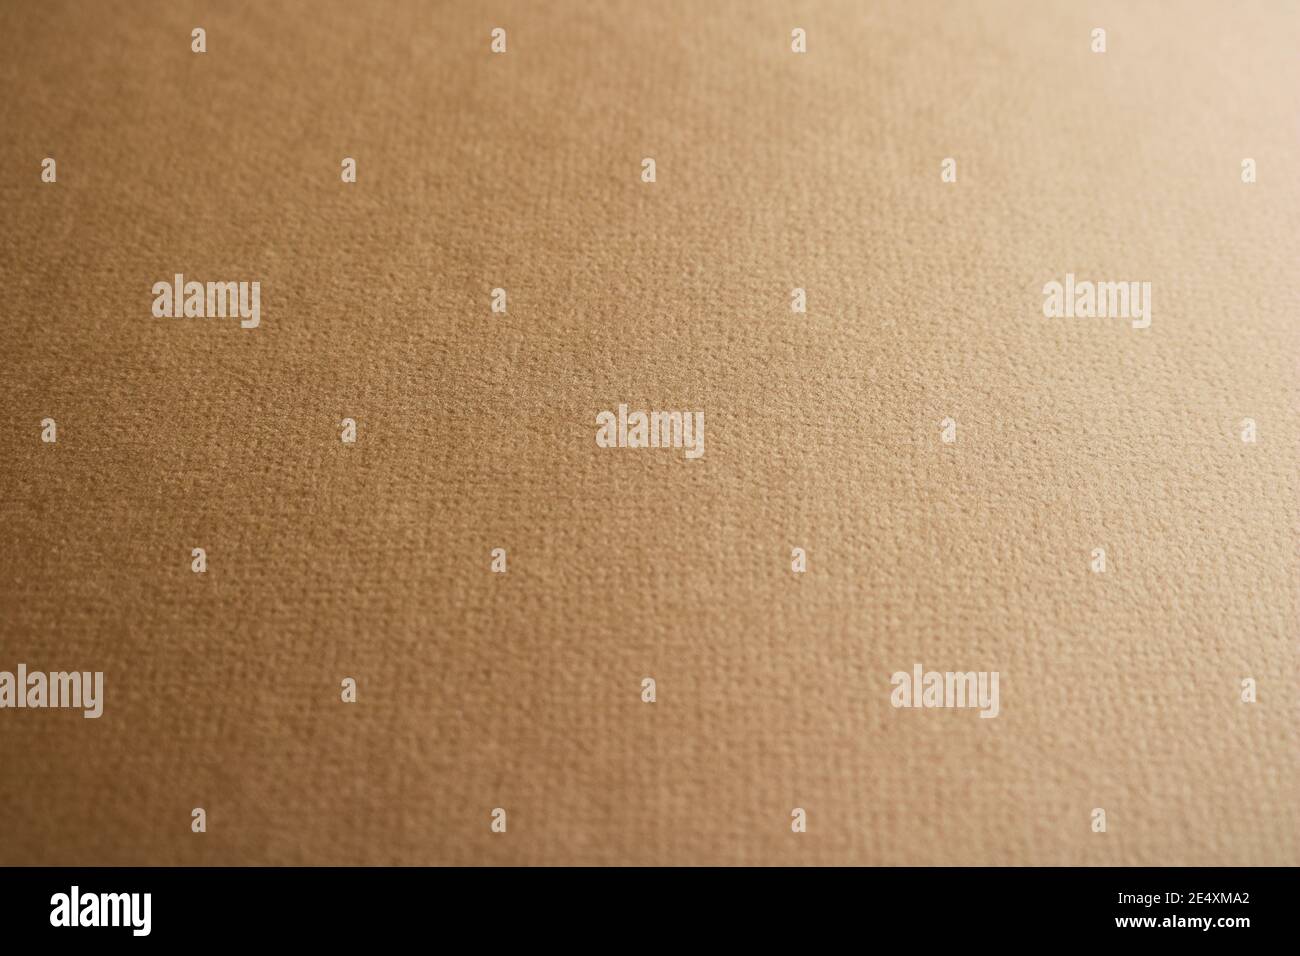 Close up of brown coloured uncoated fine art paper background texture Stock Photo